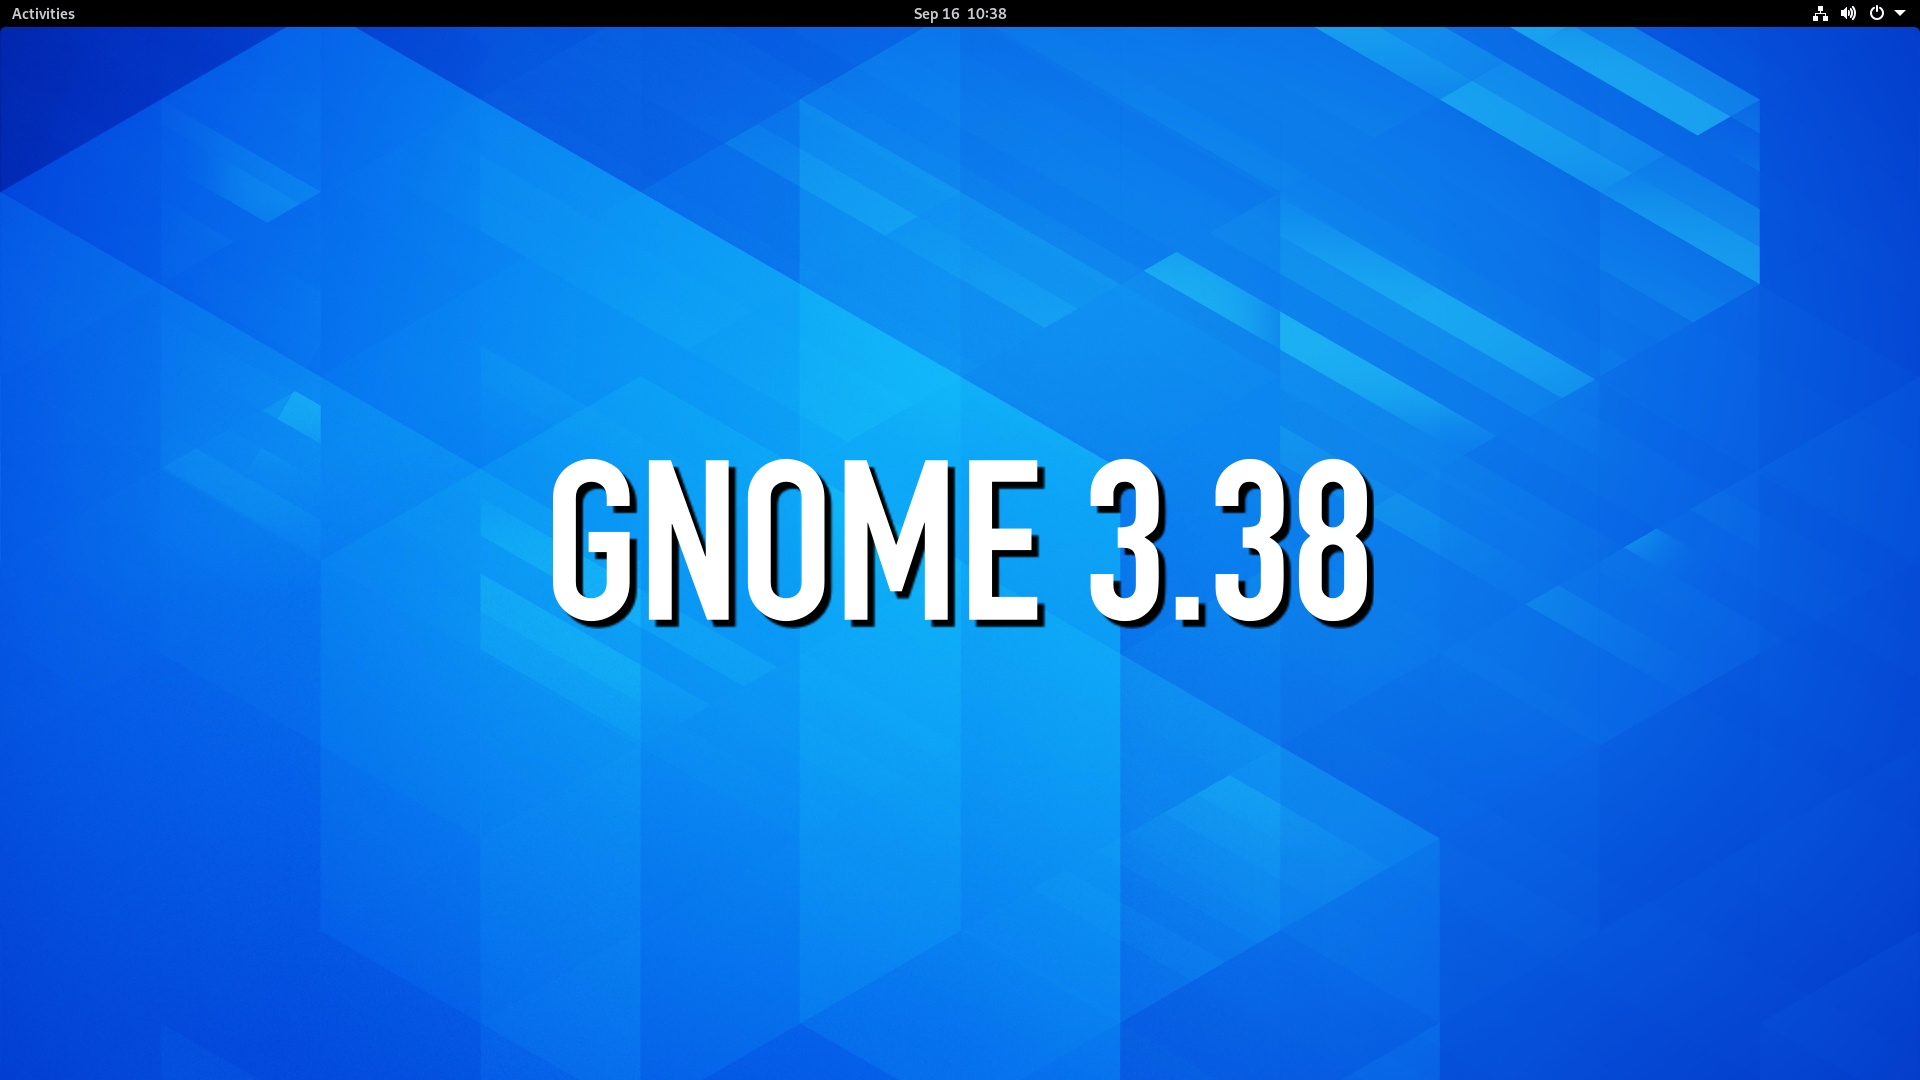 GNOME 3.38 Desktop Environment Officially Released, This Is What’s New